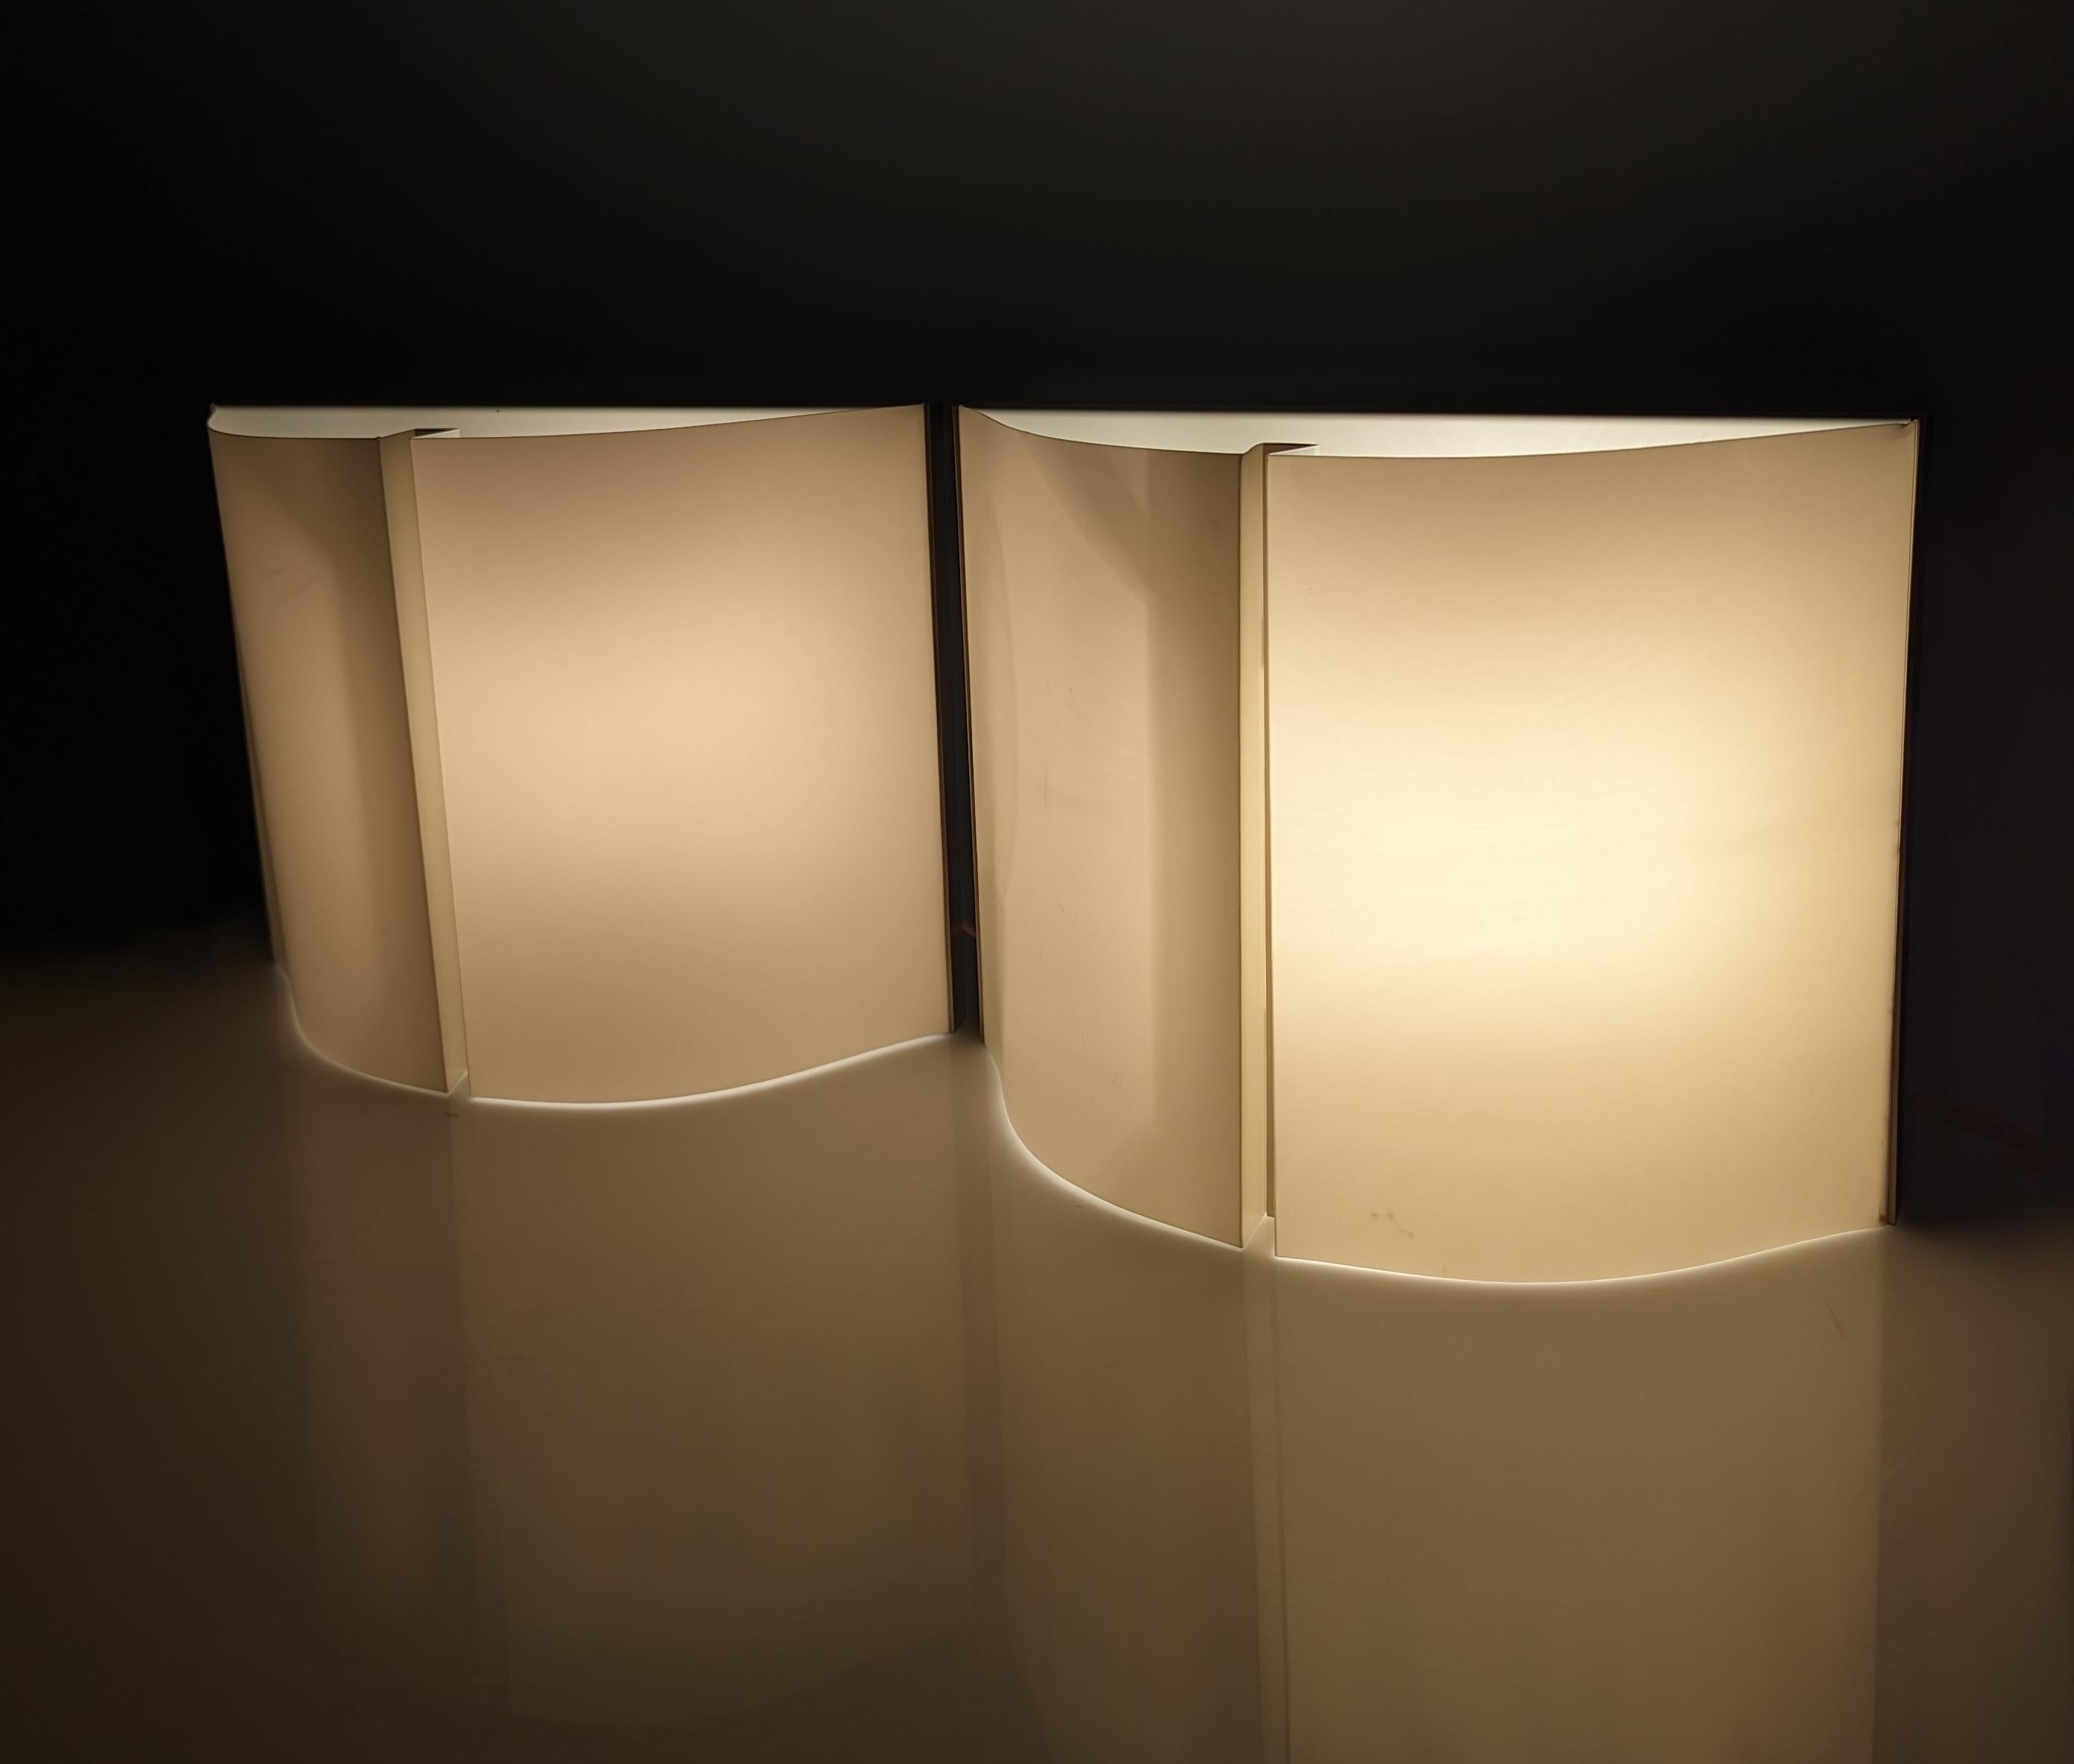 Design wall lamps produced by Metalarte, made of flexible plastic material.